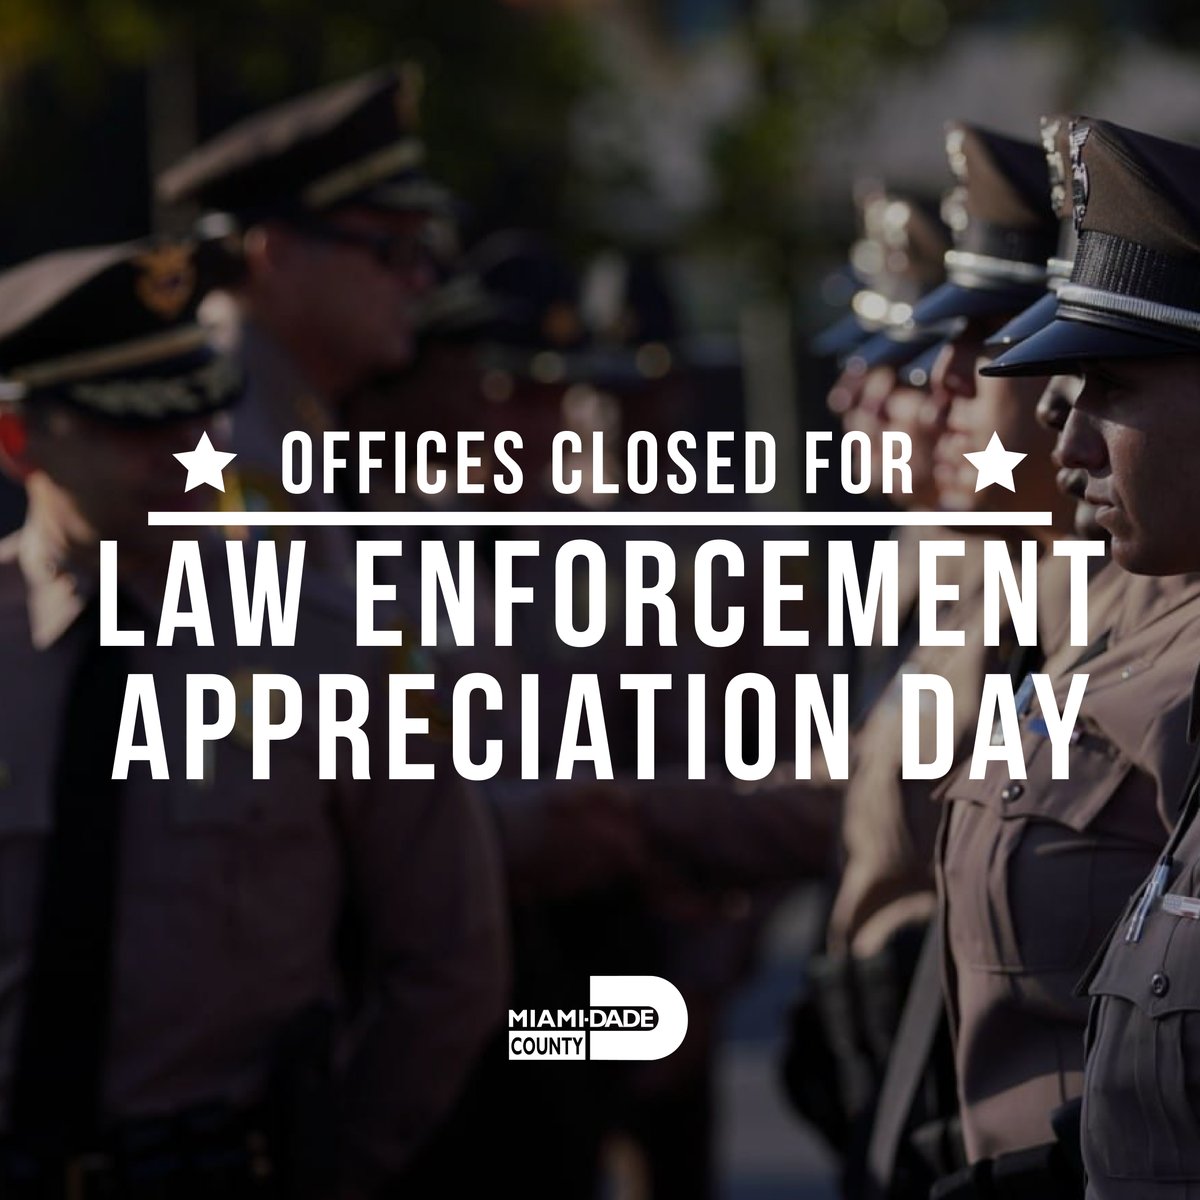 On #LawEnforcementAppreciationDay, #OurCounty recognizes the commitment of law enforcement. Our offices and libraries are closed today. @GoMiamiDade and @miamidadeswm will run on a regular schedule. Thank you @MiamiDadePD and @mdccorrections!